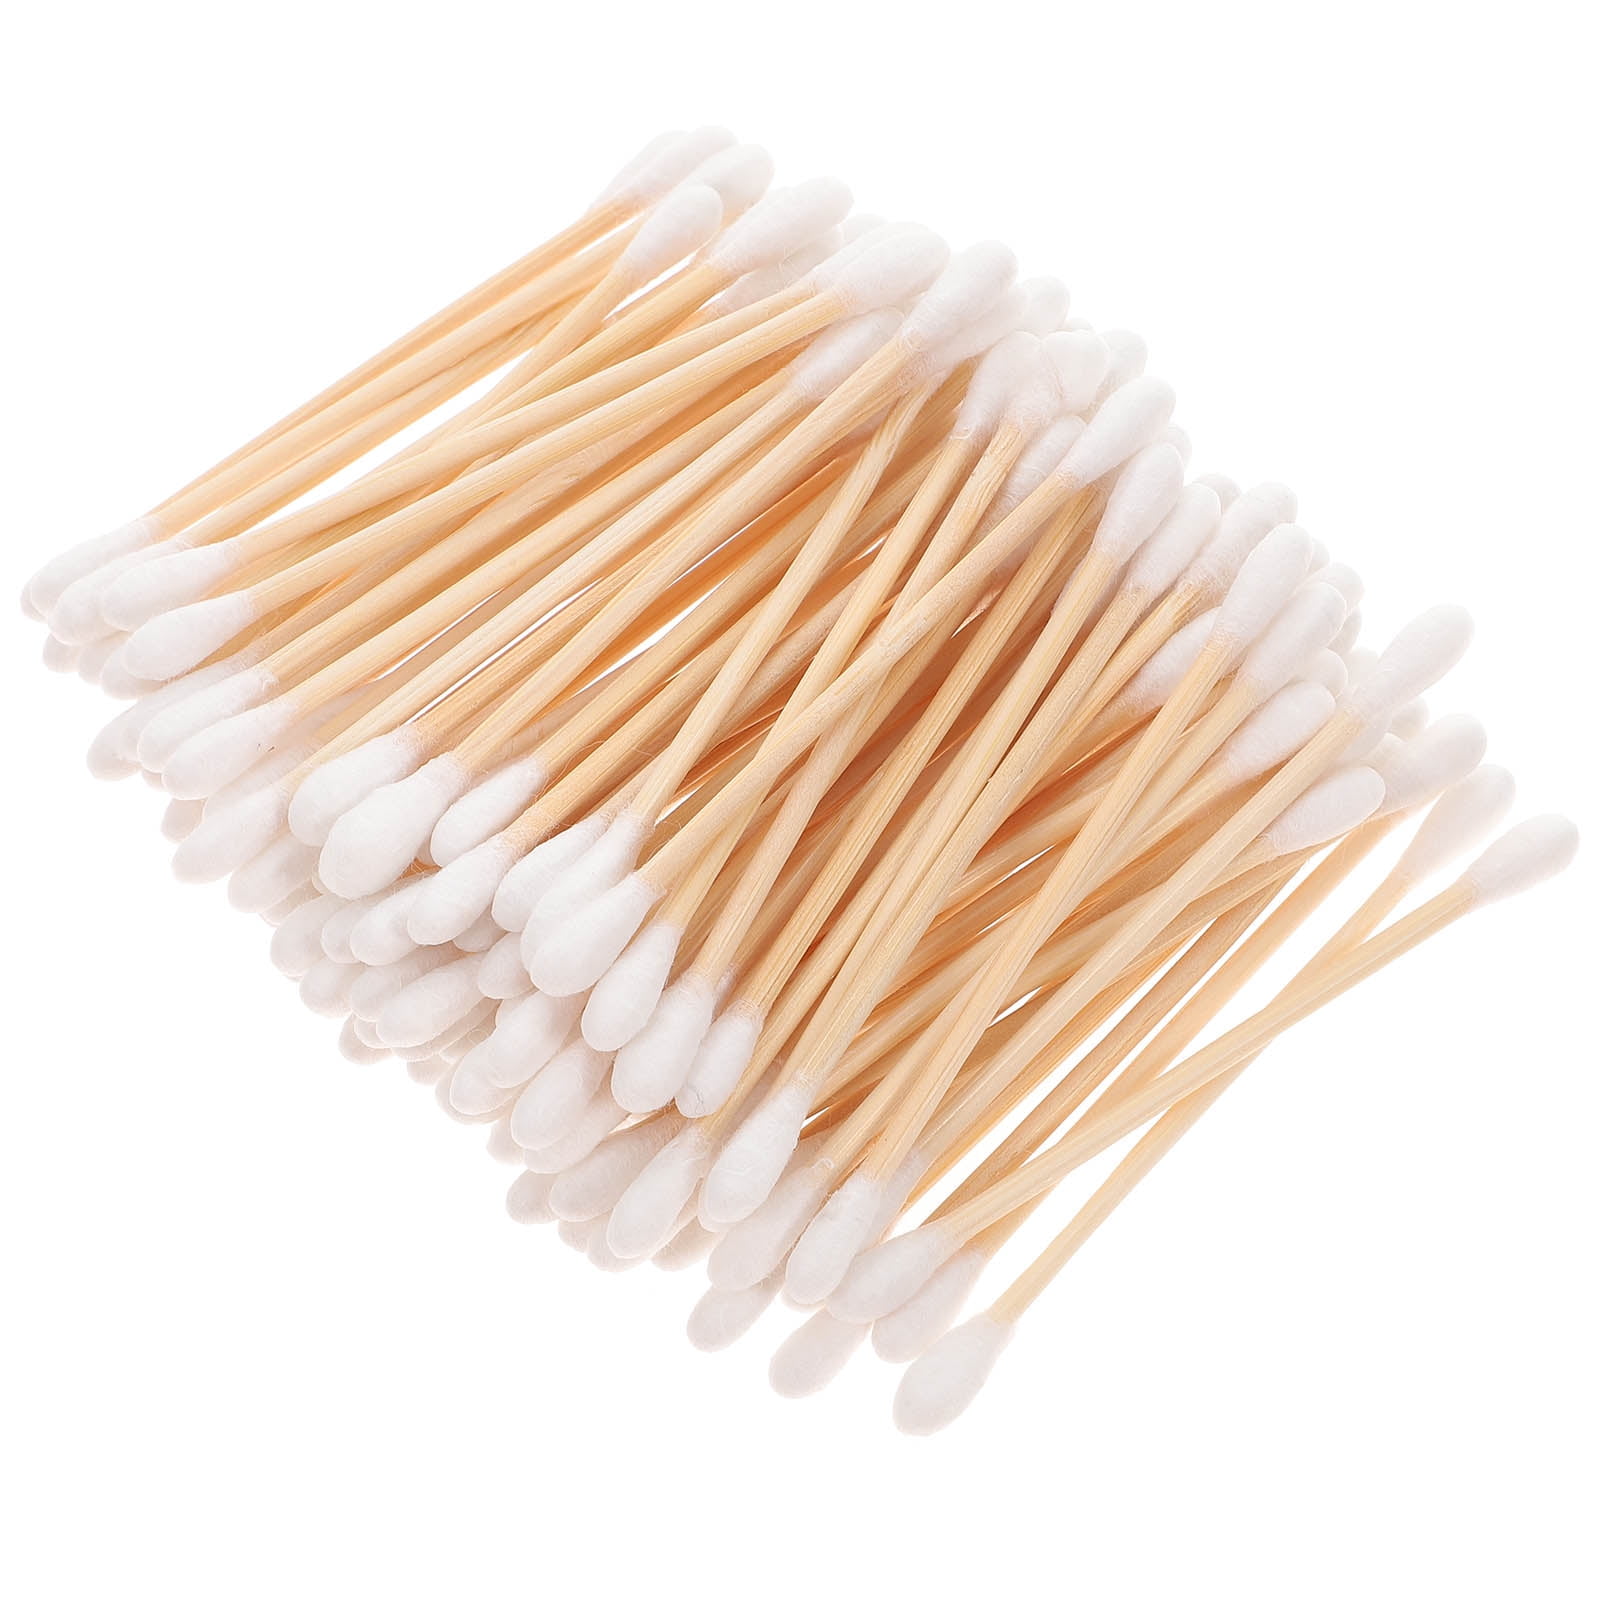  200 Count Individually Wrapped Cotton Swabs,Travel Cotton  Swabs,Cotton Stick,Double Round Cotton Swabs,Round Cotton  Swabs,Individually Packaged Double Round Head Cotton Swab,For The Ear,  Makeup, Clean : Beauty & Personal Care